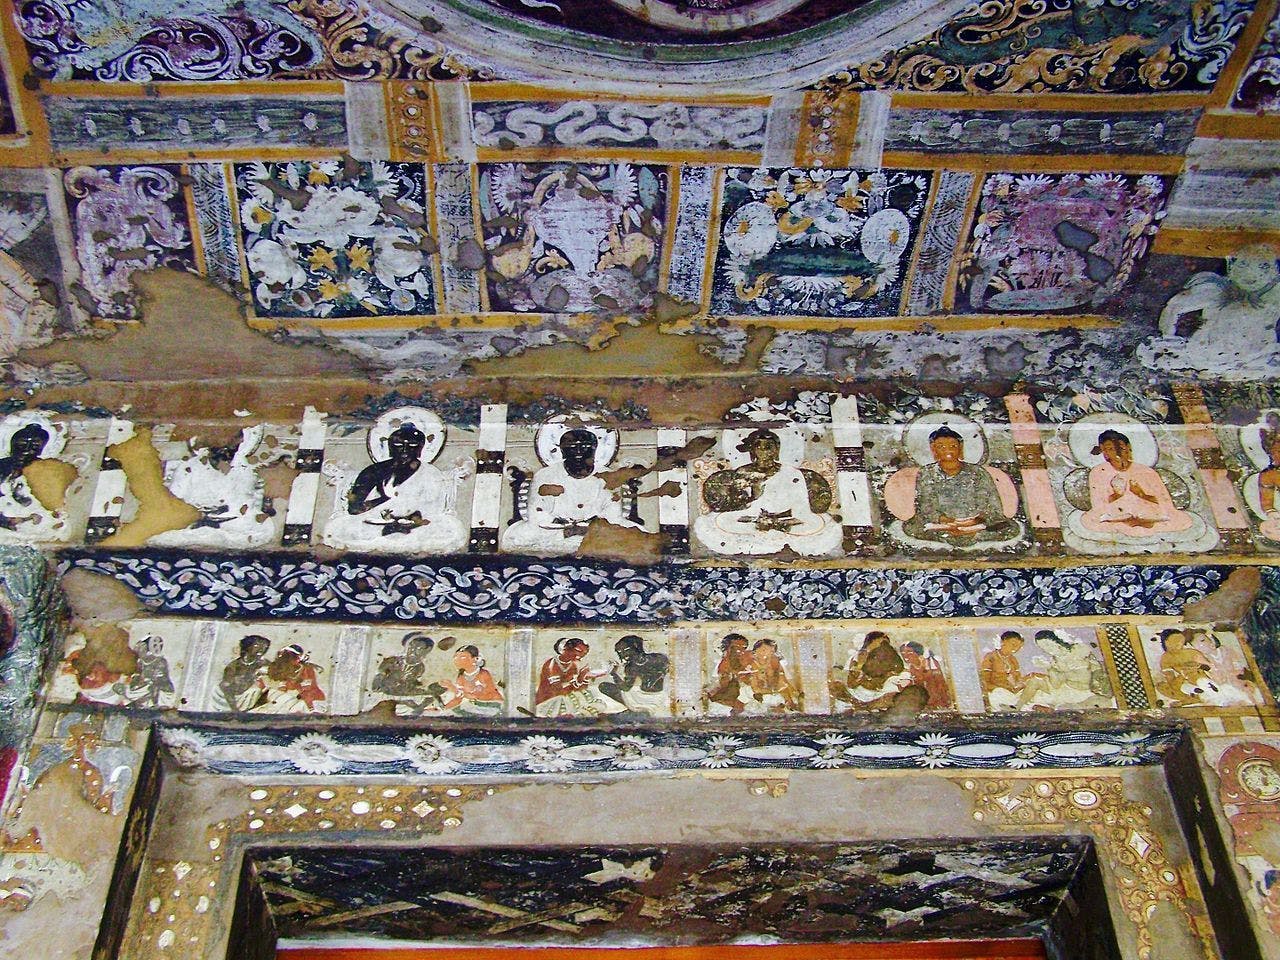 The ceiling is covered in decorative patterns, below is a row of Buddhas, and just above the doorway a couple of every day life scenes (cave 17)